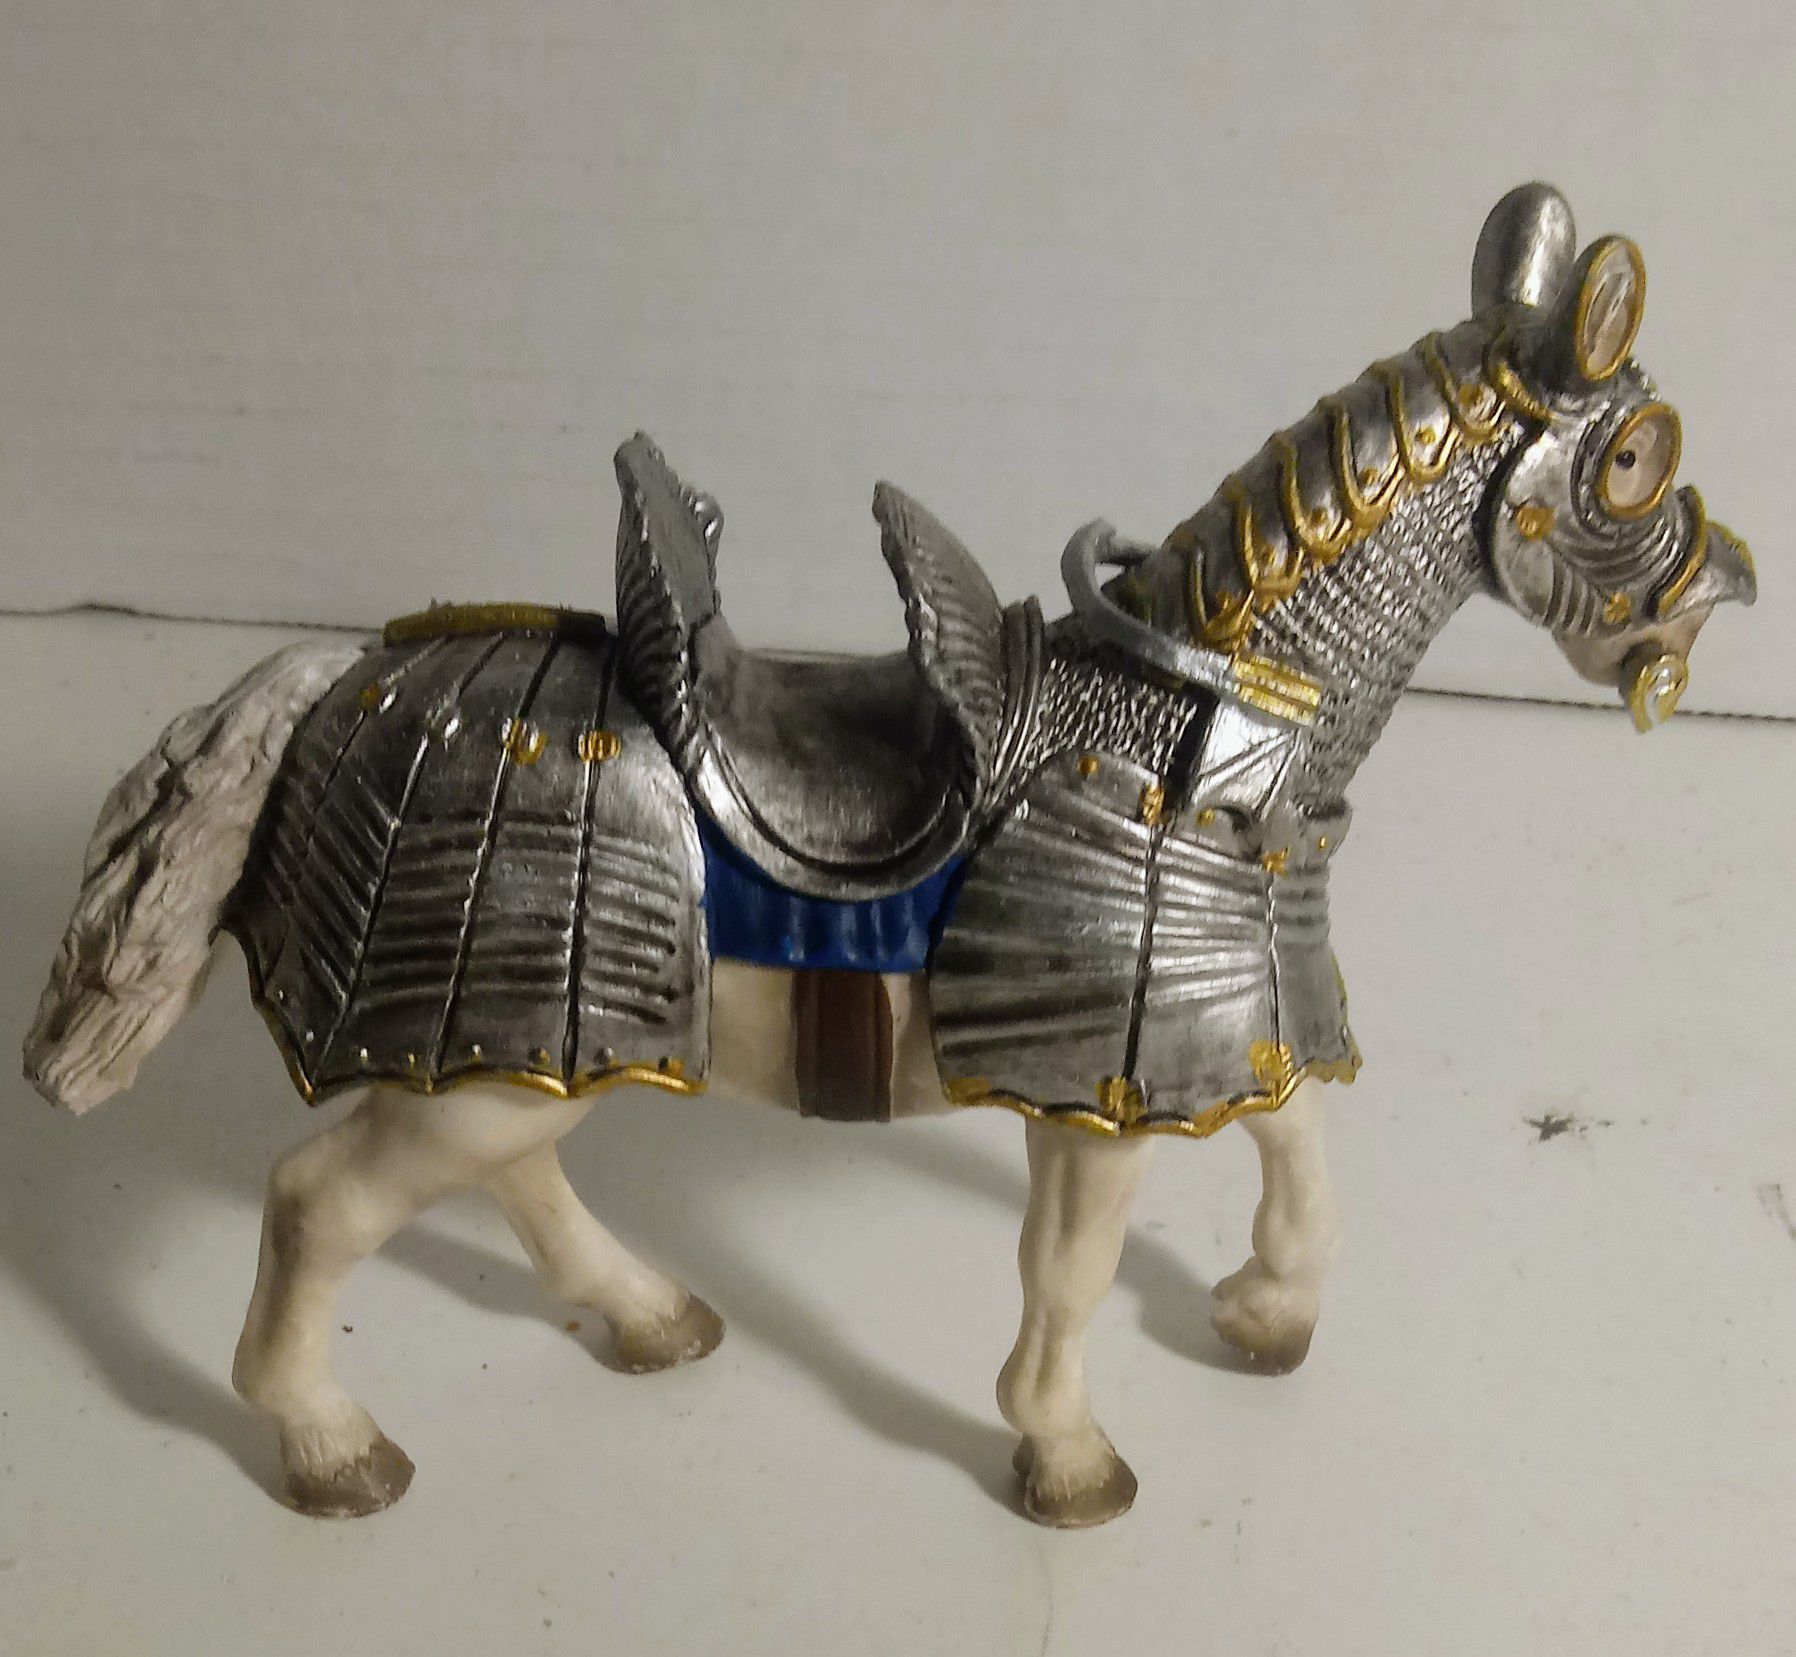 2003 Schleich 4" White Horse with Silver Armor